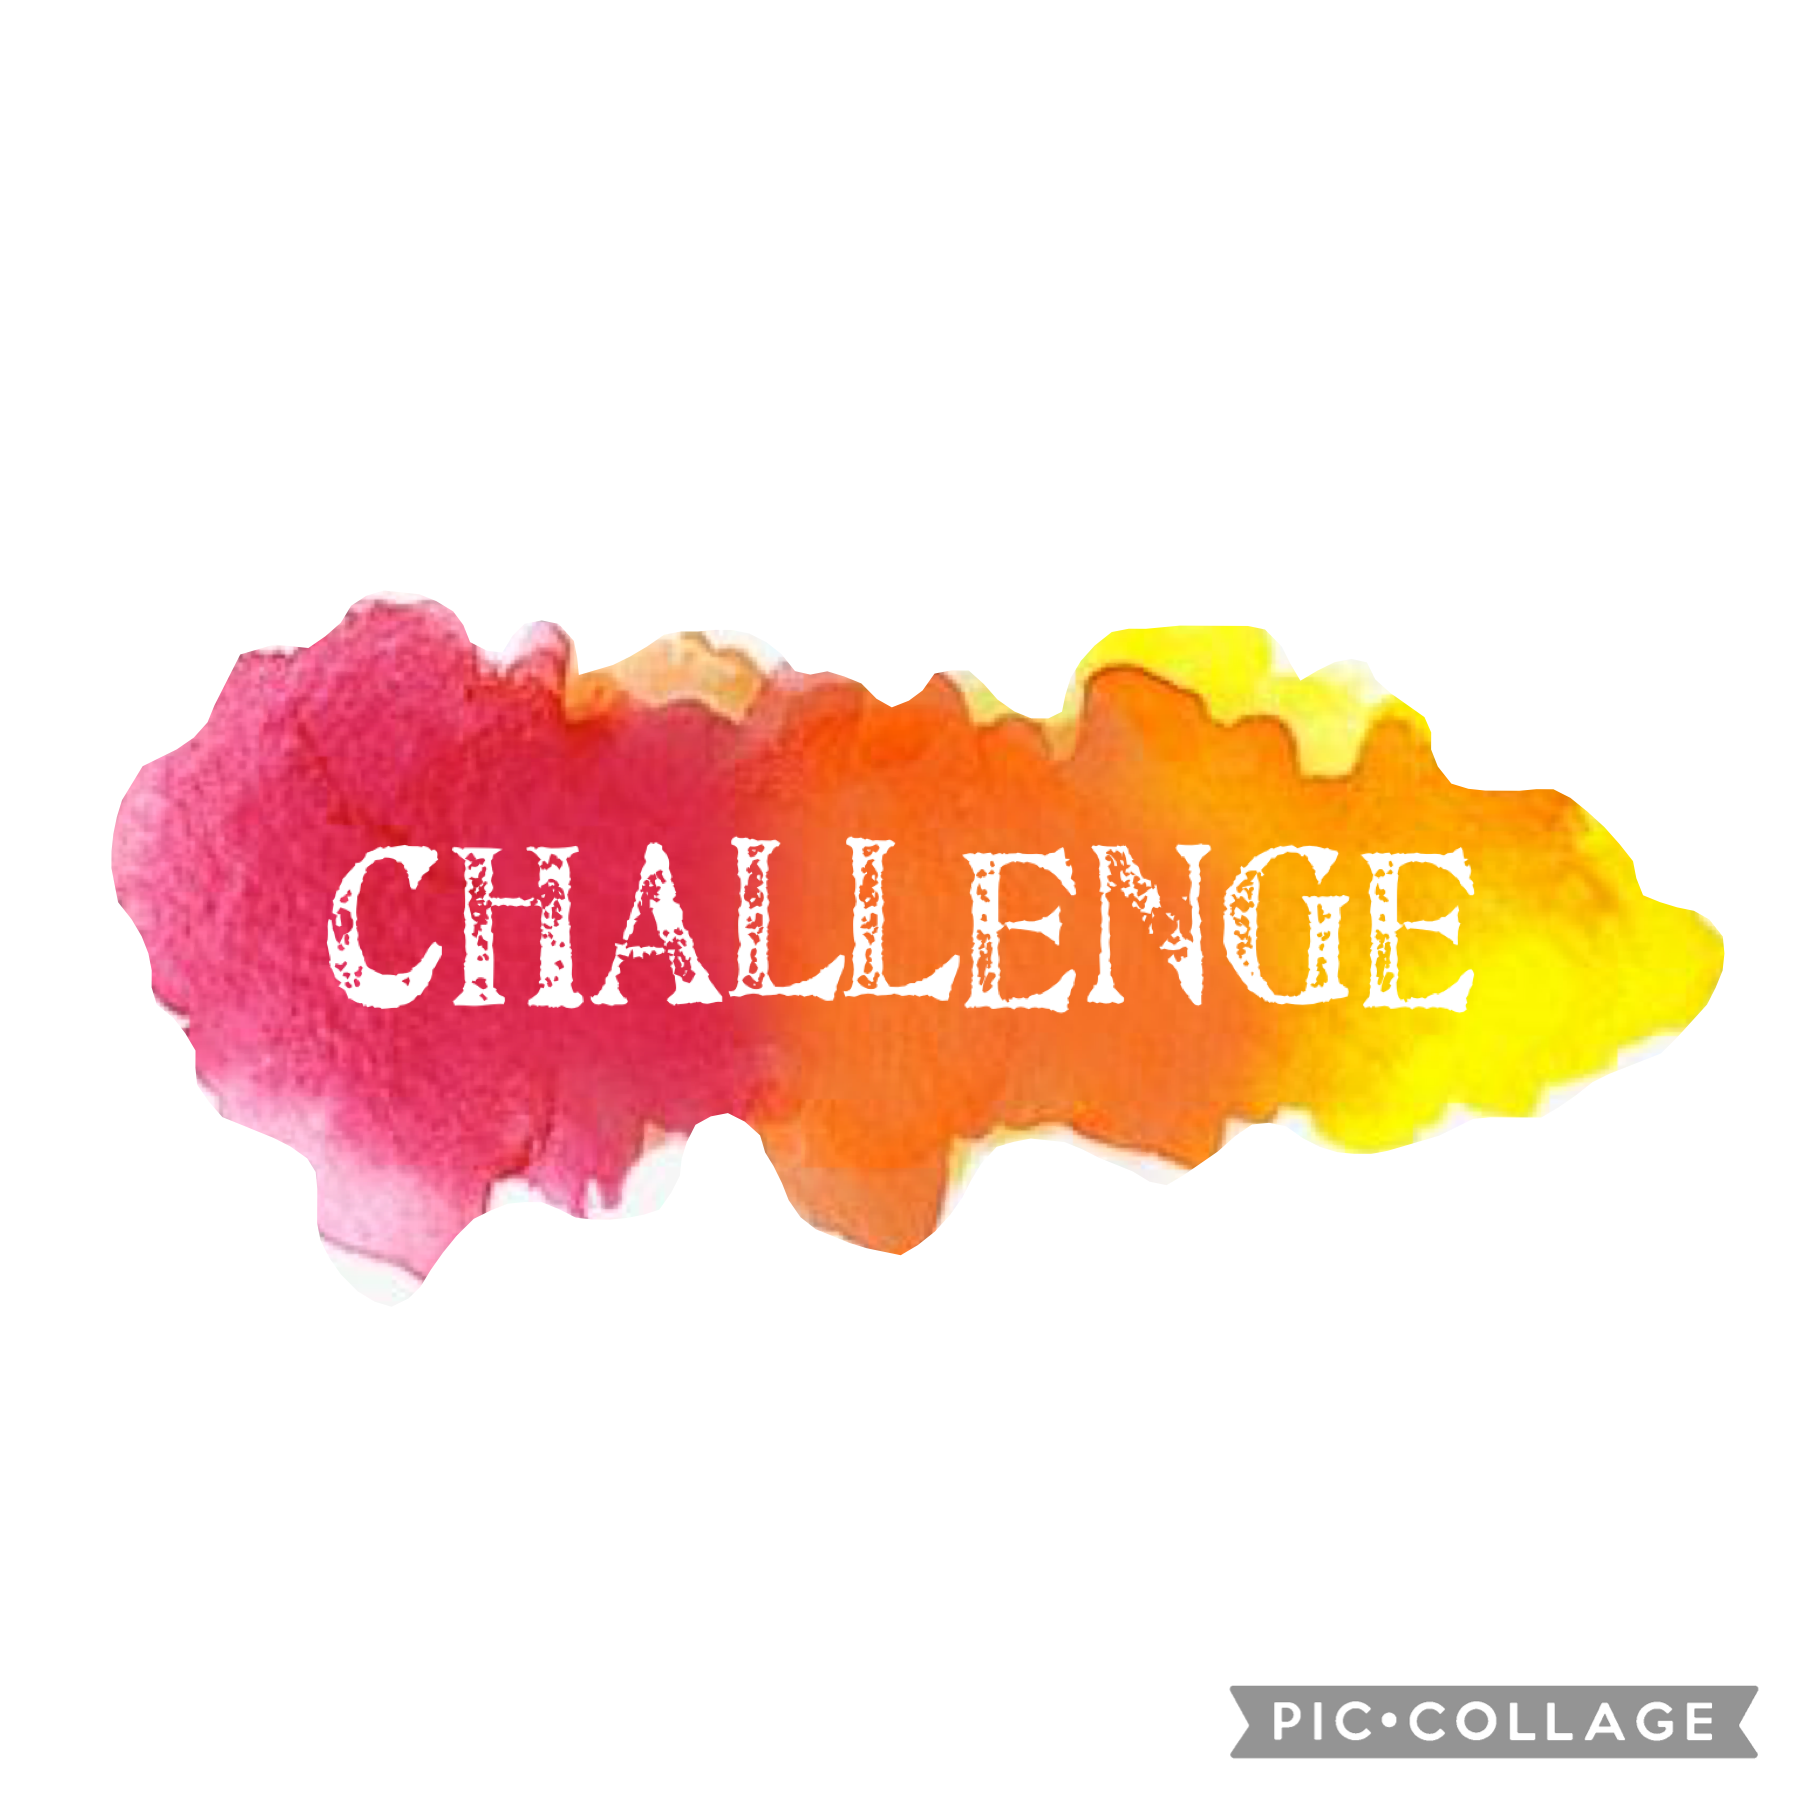 🔥TAP🔥

So i thought we should do a challenge where you guys create a remix of this post but make it entirely your own and you can add anything you like into it as long as it has some words in. There don’t need to be many words if you don’t want. 1 st priz